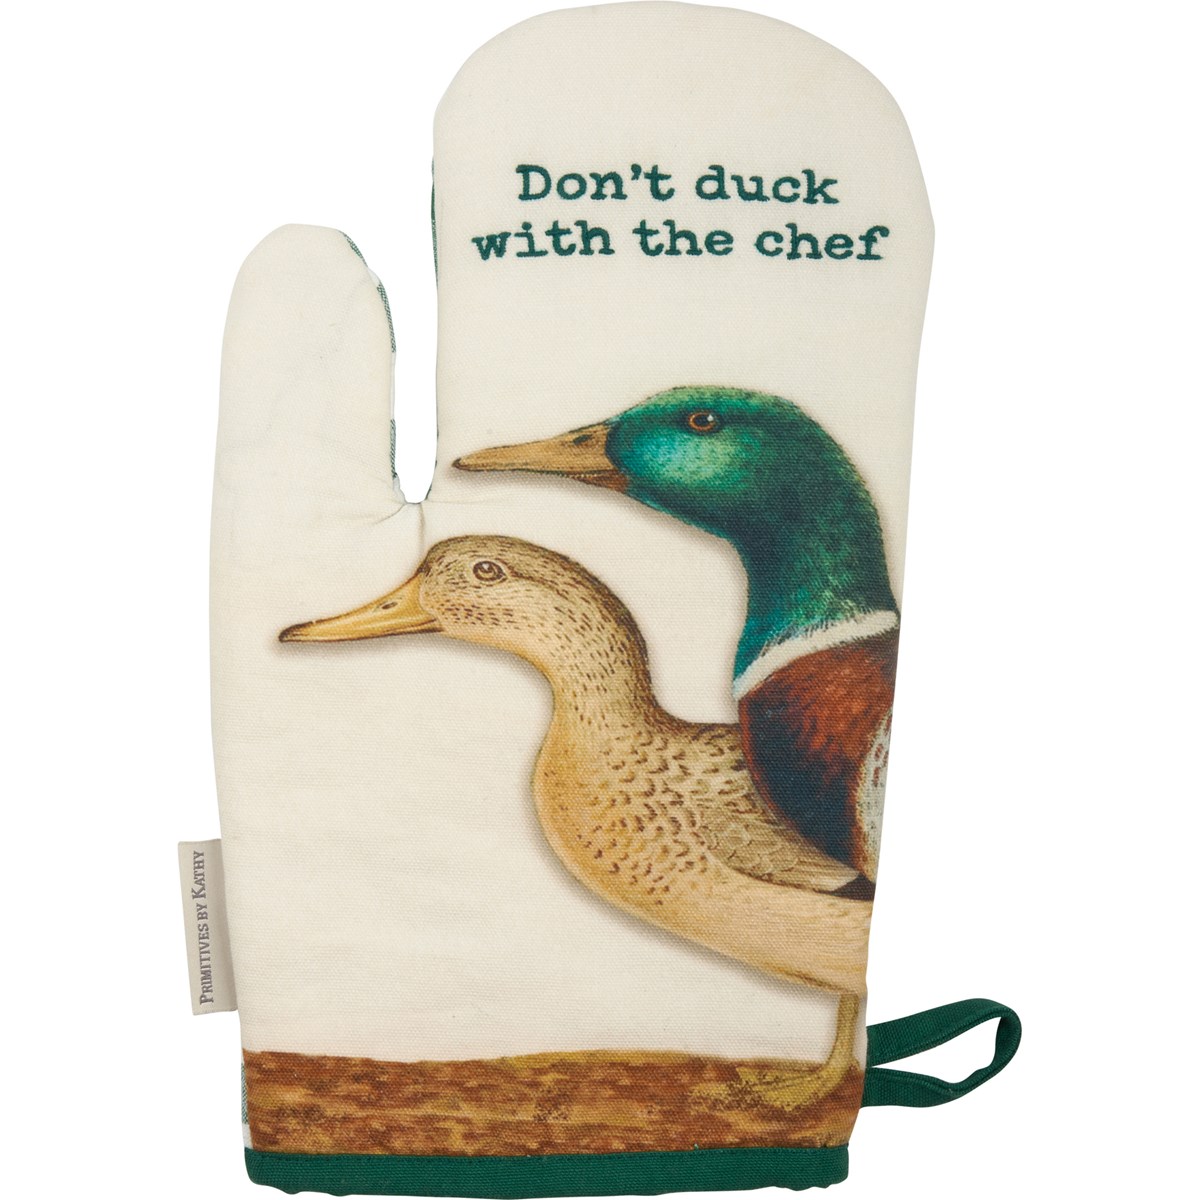 I Don't Give A Duck Kitchen Set - Cotton